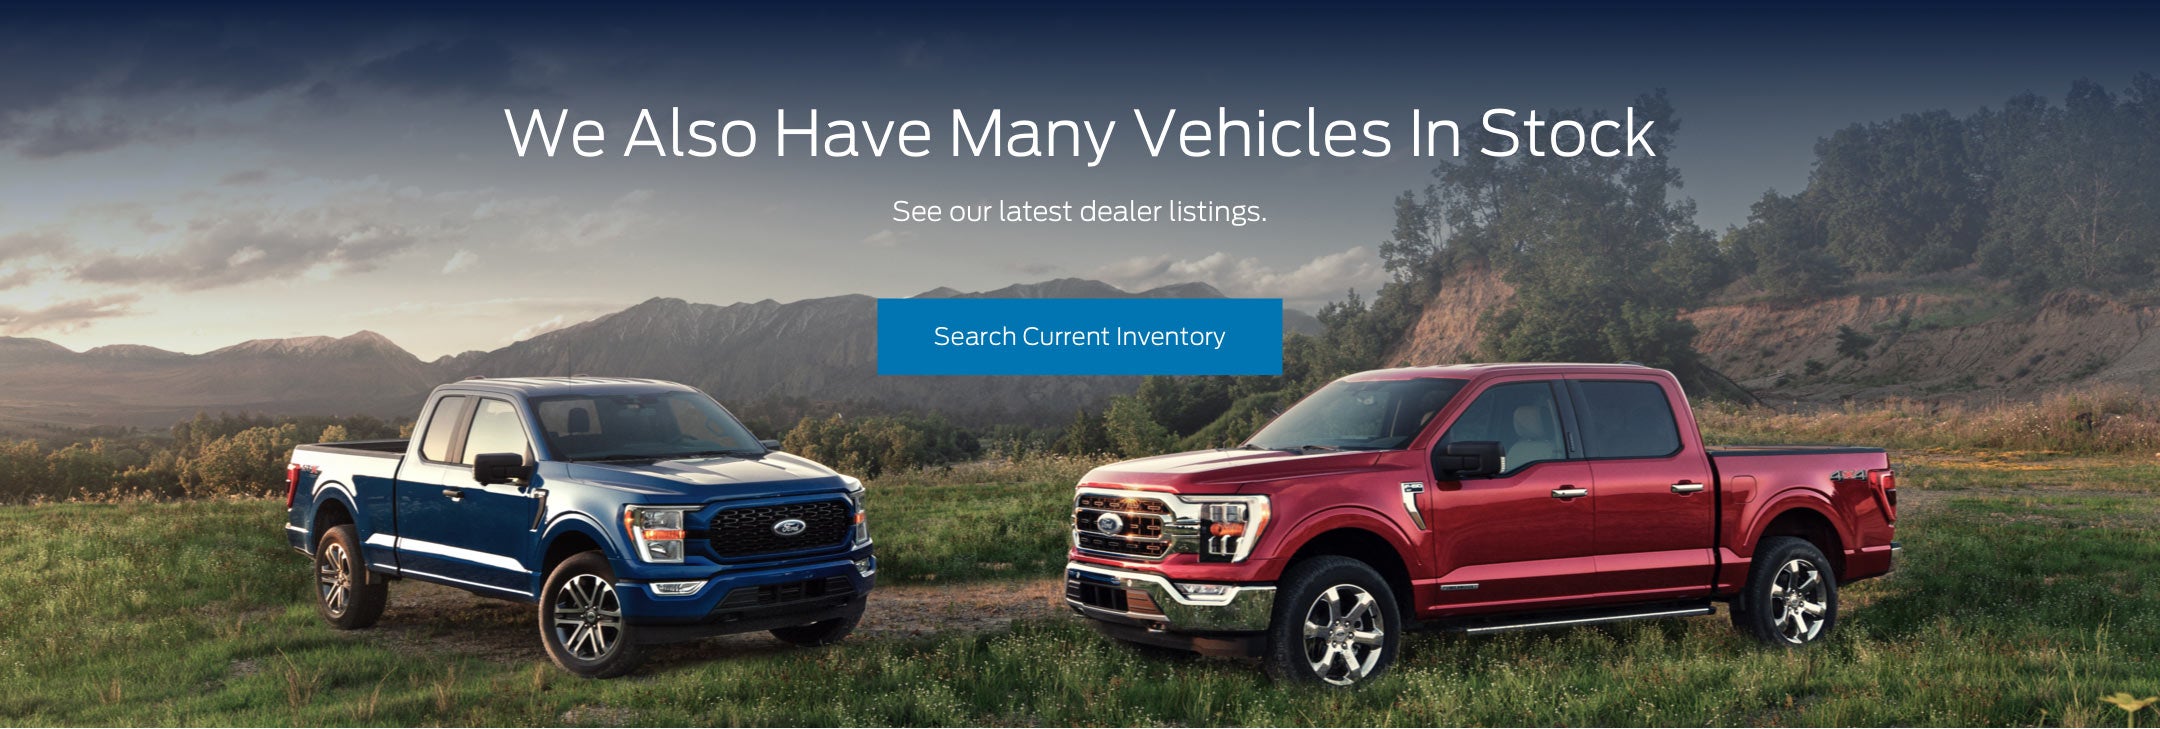 Ford vehicles in stock | Mt Orab Ford Inc in Mt Orab OH